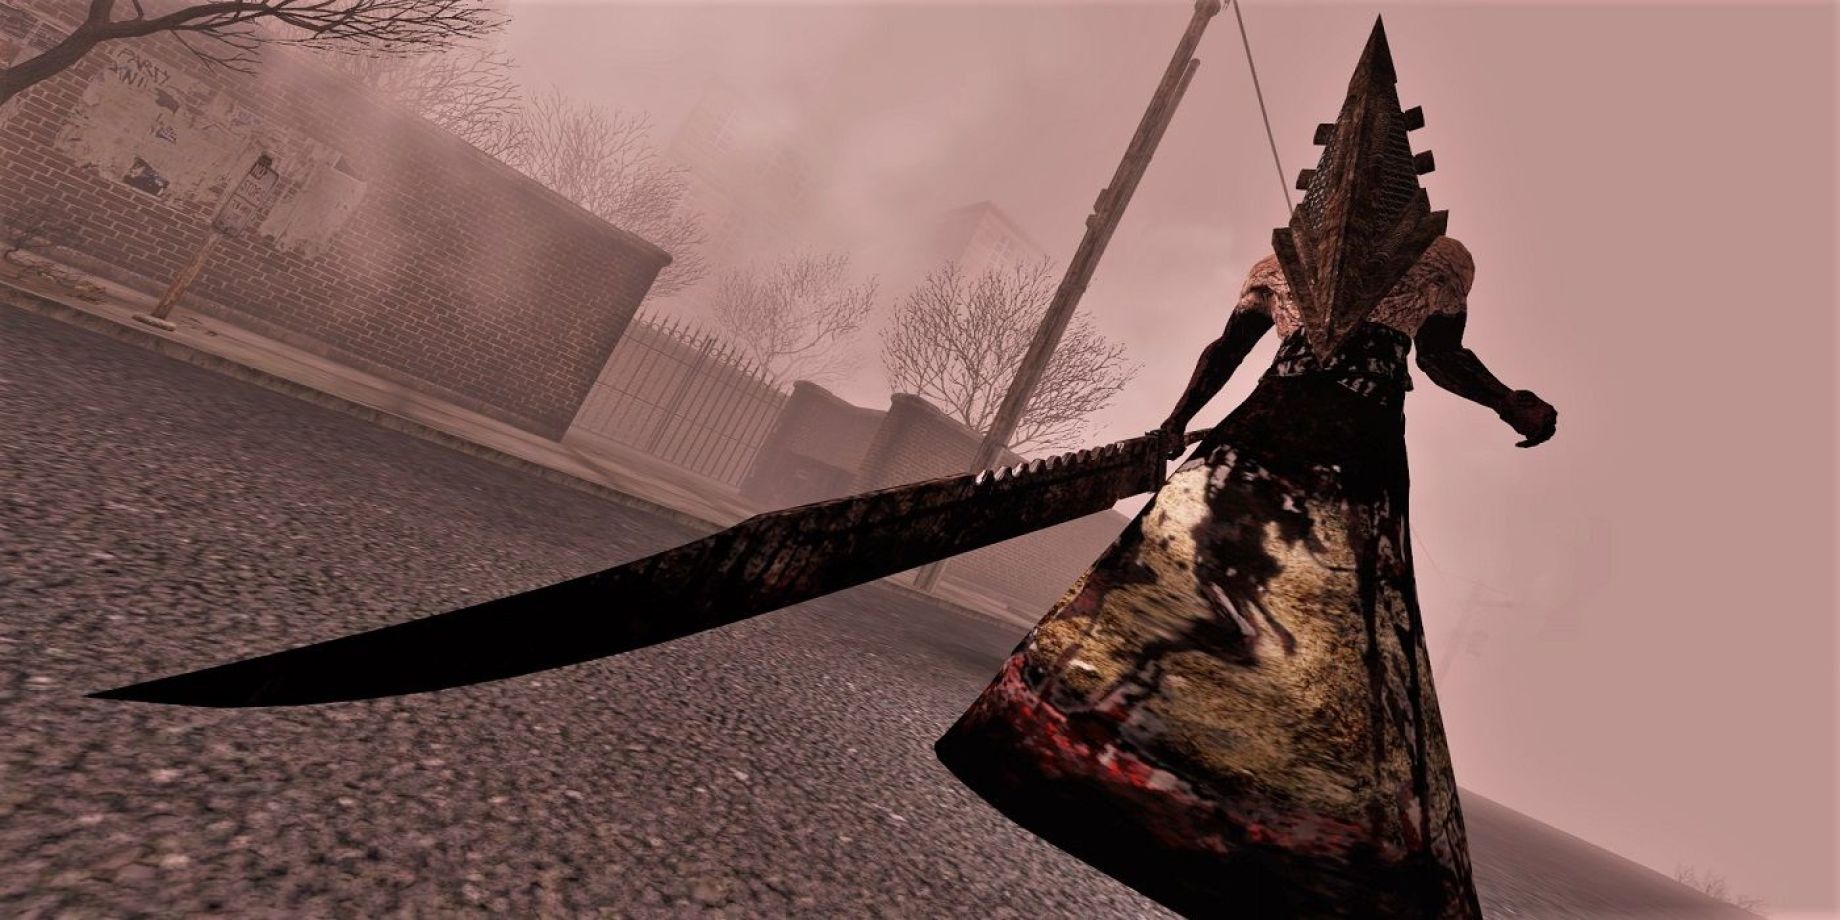 Images claiming to show Konami's Silent Hill 2 remake have appeared online